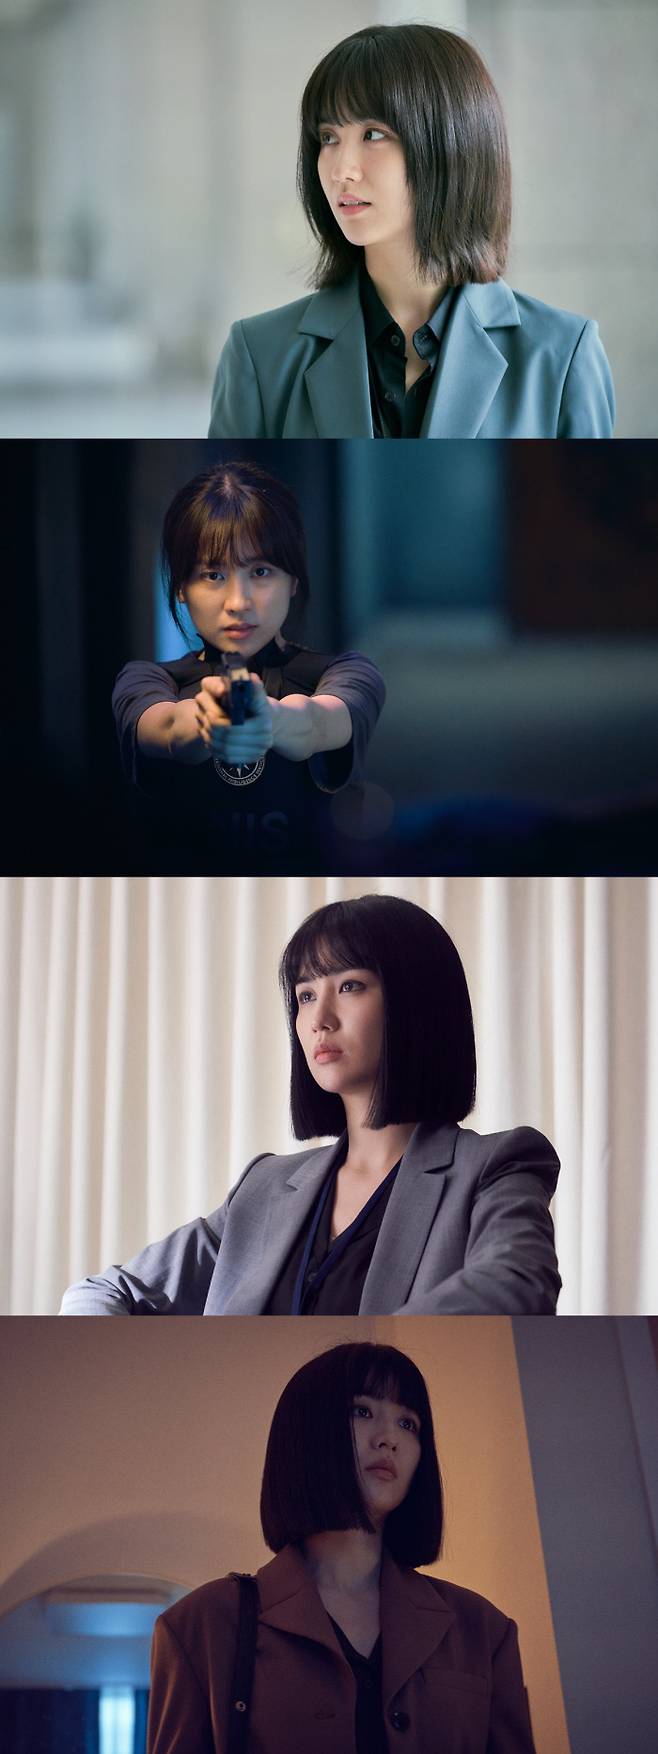 The production team of Black Sun gave a related position to Park Ha-suns getting off.With MBC drama Black Sun leaving only four times to the end, Hong Seok-woo, head of MBC drama headquarters, who has YG Entertainment for Black Sun, delivered a special watch point.The Black Sun is a story that happens when the best field agent in the NIS, who disappeared a year ago, returns to the organization to find an internal traitor who has dropped him into hell.The three beats are in perfect harmony, with the sophisticated production of director Kim Sung-yong, who directed MBC drama Ok Jung Hwa, the solid script of Park Seok-ho, the winner of the MBC drama drama contest, and the inhaling performance of the genre Nam Gung-min.If you put the remaining four times in a word, it will be a cider storm, said Hong Seok-woo, director of the department. Many clues and hints scattered around each time will be rushed toward the truth behind the scenes.In particular, the 9th to 10th broadcasts this week will be a legend society that is as good as the first time that shocked the house theater, he added.Hong Seok-woo also expressed his opinion as a YG Entertainment to viewers who expressed regret over the amount of Seo Soo-yeon played by Park Ha-sun.The previous-class development of her death in the sixth episode of the broadcast, which was the main character, shocked many viewers.Seo Soo-yeon is a YG Entertainment character who plays a role as a game changer who takes a shocking turning point in the middle of the play and leaves.It was an important and difficult character that connects the main characters of the NIS apart from the amount in the drama, so I needed a reliable actor with acting skills.Its the role Ive been casting the most hard-pressed.He did not forget to explain for viewers who still take question marks about Seo Soo-yeons character.The unscrupulous relationship that depends on each other emotionally or is even used for such a thing is also shown in many spy novels and movies, and Seo Soo-yeon character in Black Sun is also the person who reveals the dark part of the spy world the most, said Hong Seok-woo, director of the agency. However, it is difficult to express the complex remady of the character Seo Soo-yeon in three dimensions. It was true that the volume was small.I think I have done a good job of playing difficult characters because I was Park Ha-sun Actor. I want to solve this regret through Hanako to Anne Moebius: Black Sun, which will be presented mainly by Seo Soo-yeons past Remady, and I did not forget the expectation of Moebius: Black Sun to be released following this broadcast.Moebius: The Black Sun is a two-part Hanako to Anne drama that will be followed by The Black Sun, which will be broadcast on Friday and Saturday, the 29th.The works will be focused on Park Ha-sun (Seo Soo-yeon), Jeong Mun-seong (Jang Chun-woo), and Jang Young-nam (Do Jin-suk) as works that can meet the world view in the Black Sun from other perspectives.Moebius has a lot of hidden stories, but I try to solve how it became a blackened spy agent centered on the character Seo Soo-yeon, which was not shown enough in the main part, said Hong Seok-woo. If the main part of the Black Sun mainly showed masculine action centered on the character Han Ji-hyuk, The story of the point of view will be unfolded, he said.Meanwhile, Black Sun will be broadcast 9 times at 9:50 p.m. on the 29th, and can be viewed through the largest online video service platform in Korea.